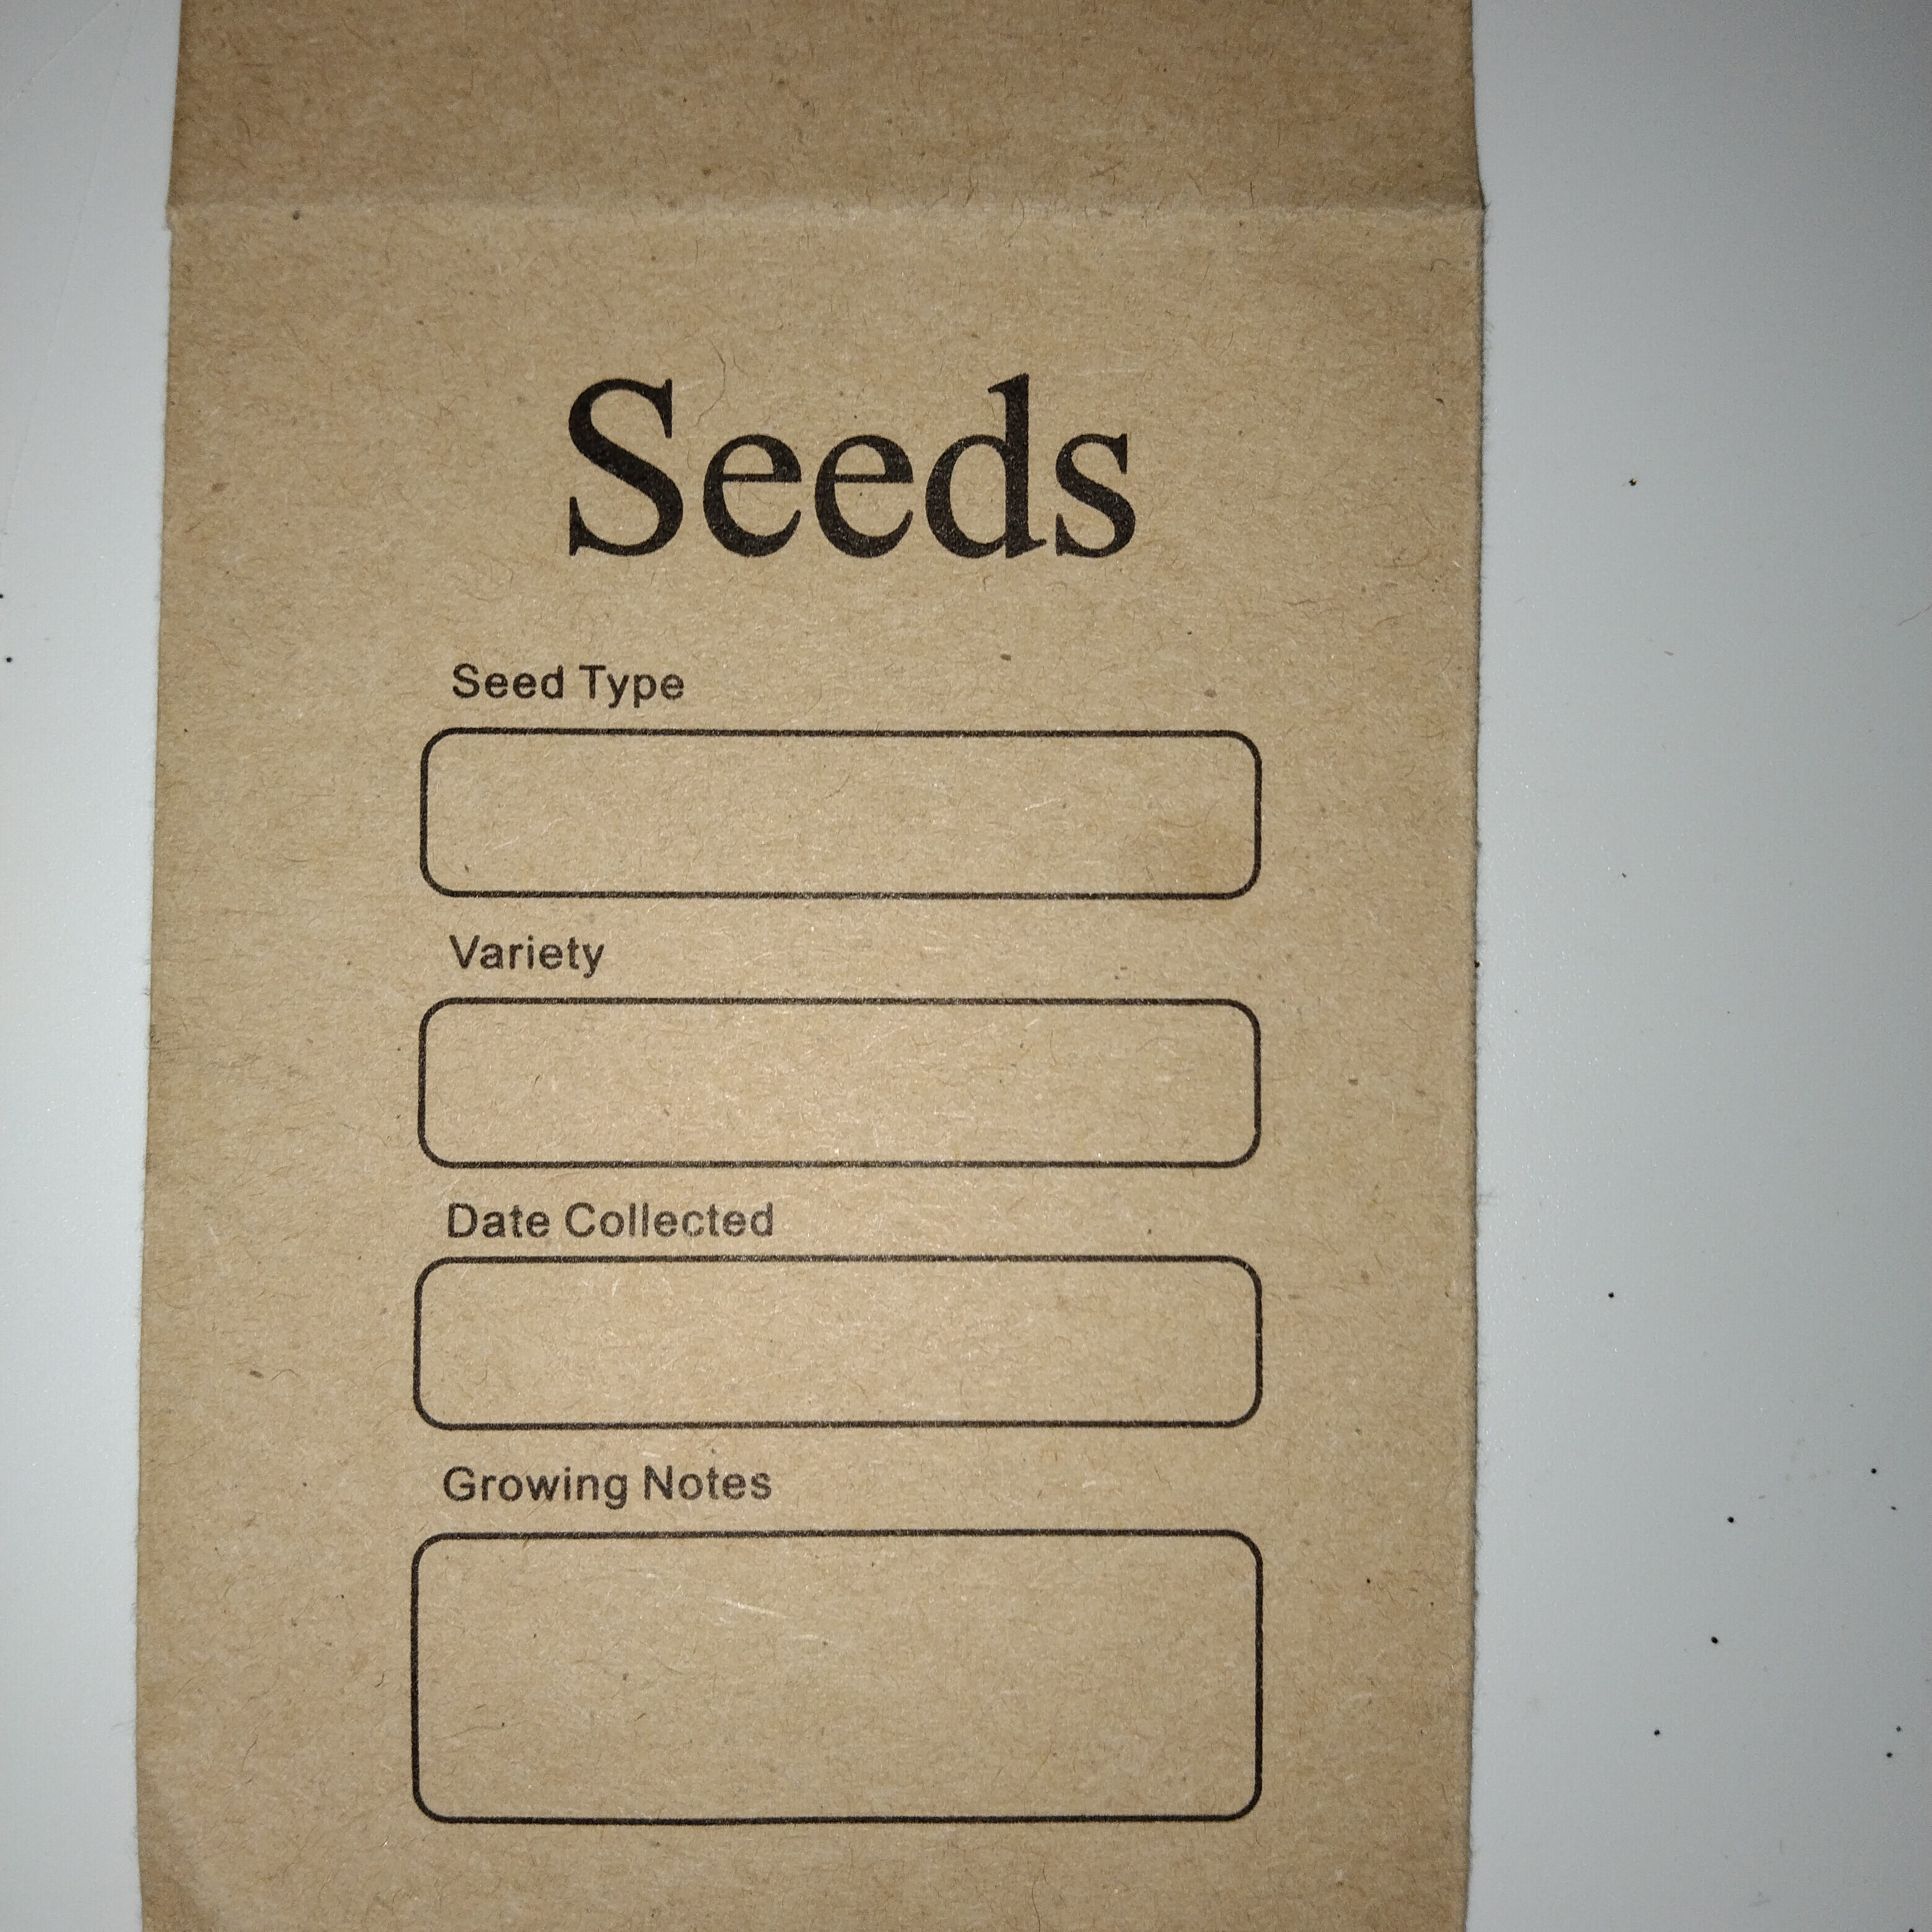 10pcs Seed Envelopes Resealable Self Sealing Seed Envelope Seed Packets,  Seed Saving Envelopes with Preprinted Seed Collecting Template for  Collection of Seeds